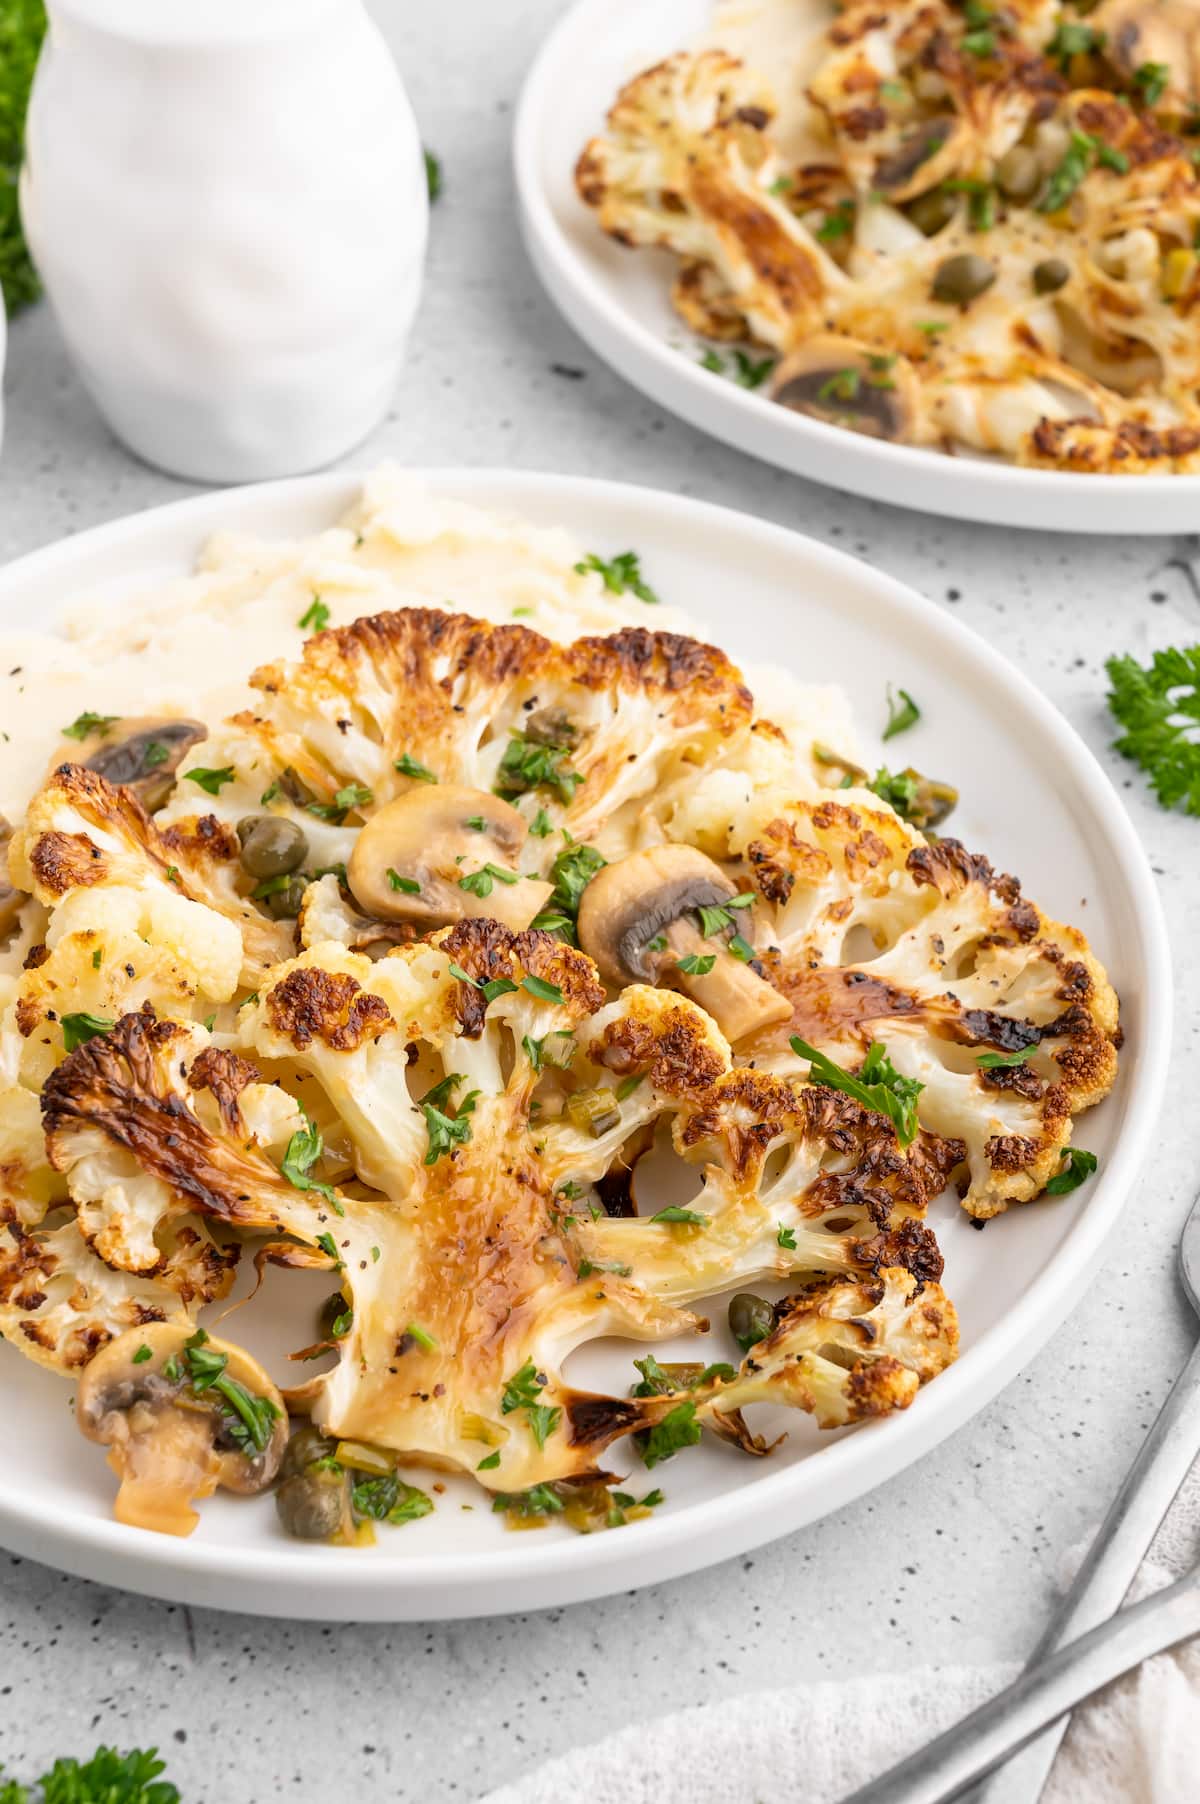 Cauliflower steaks on a plate of mashed potatoes, with piccata sauce on top.